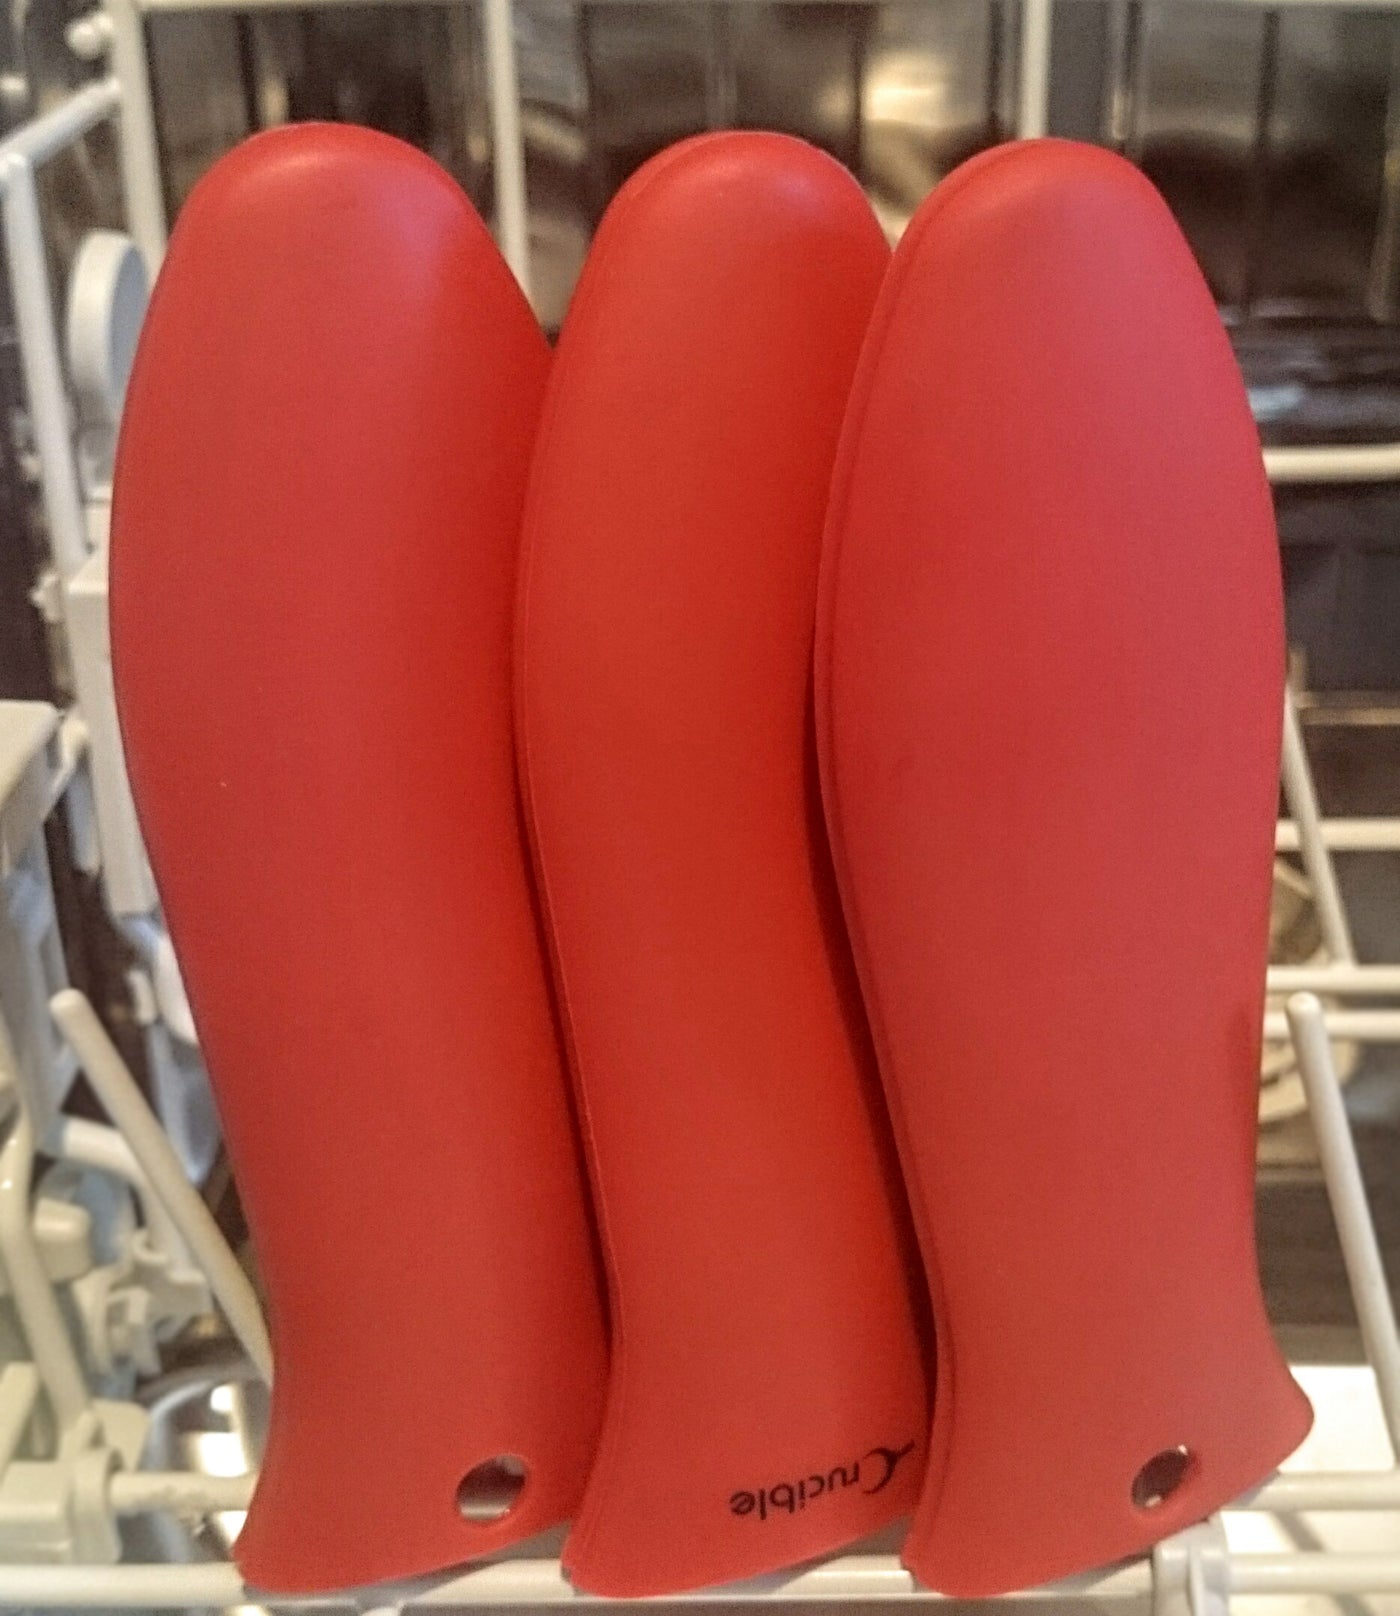 Silicone Potholder (Red Large) for Cast Iron Skillets